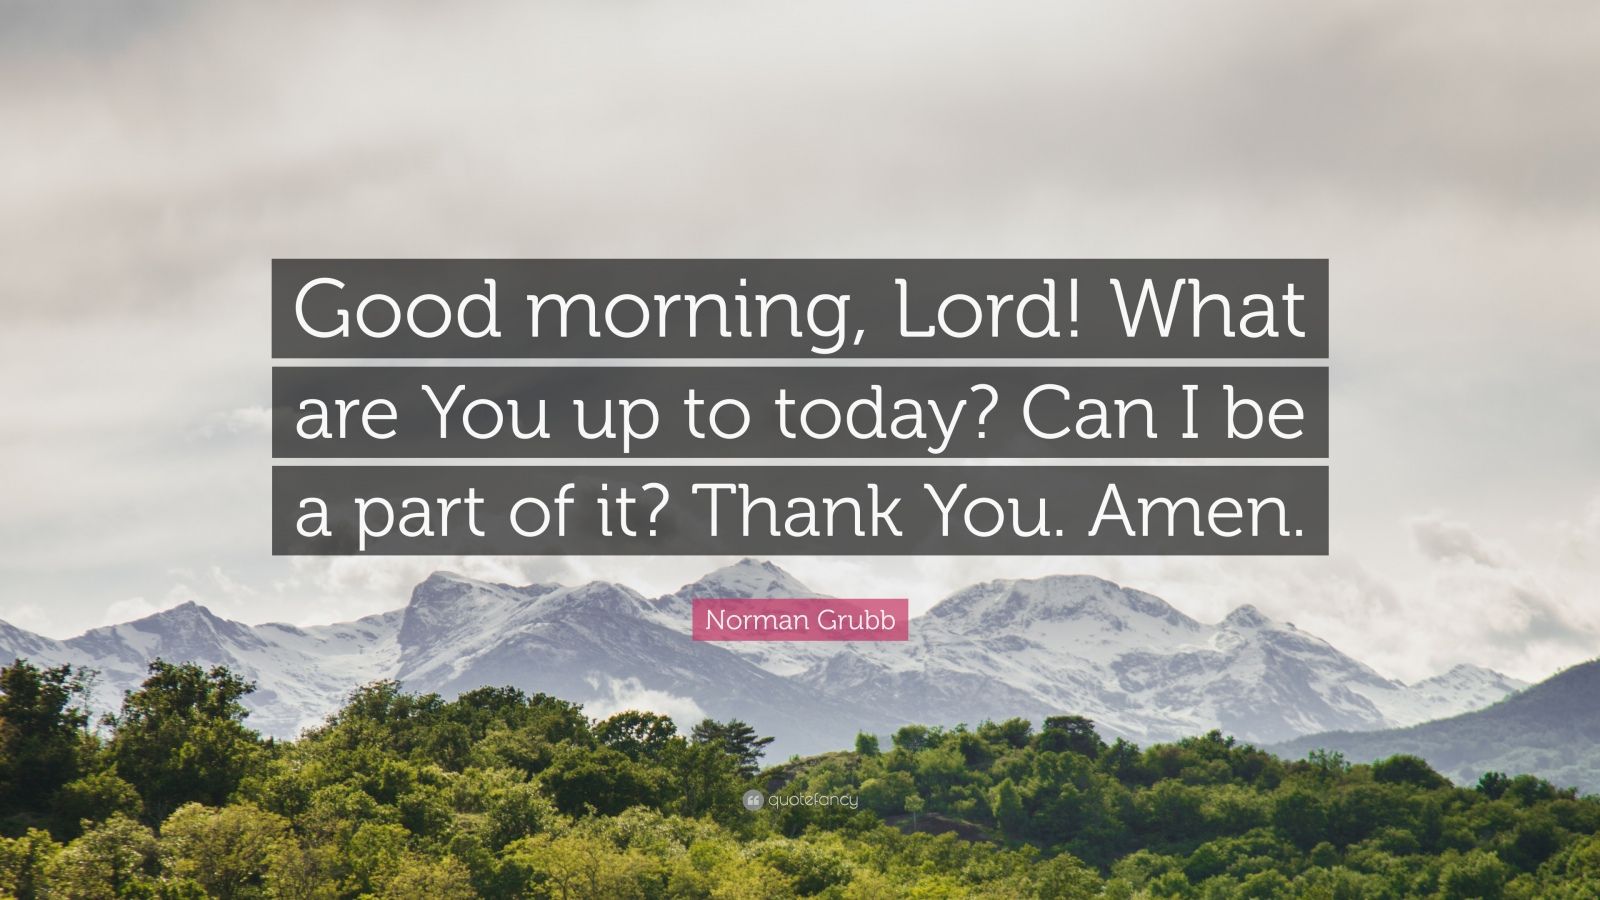 Norman Grubb Quote Good Morning Lord What Are You Up To Today Can I Be A Part Of It Thank You Amen 9 Wallpapers Quotefancy